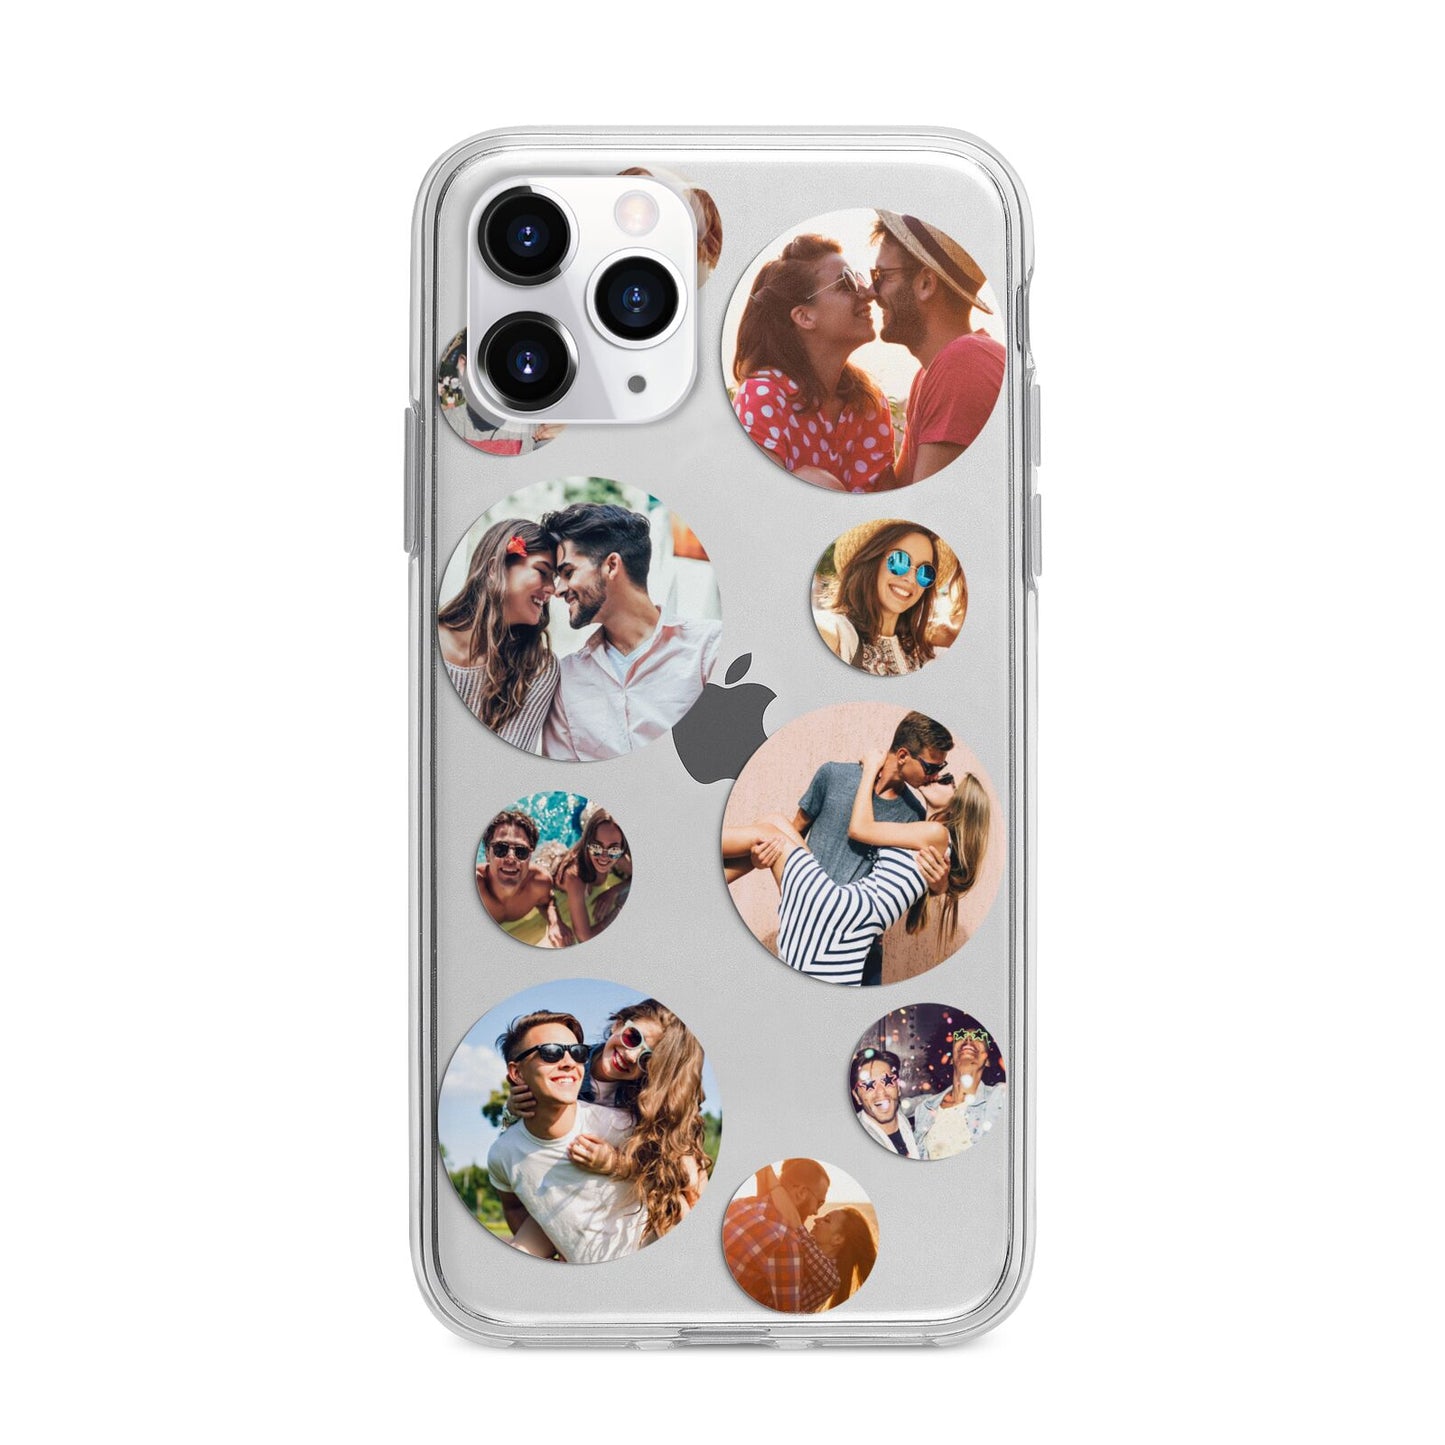 Multi Circular Photo Collage Upload Apple iPhone 11 Pro in Silver with Bumper Case